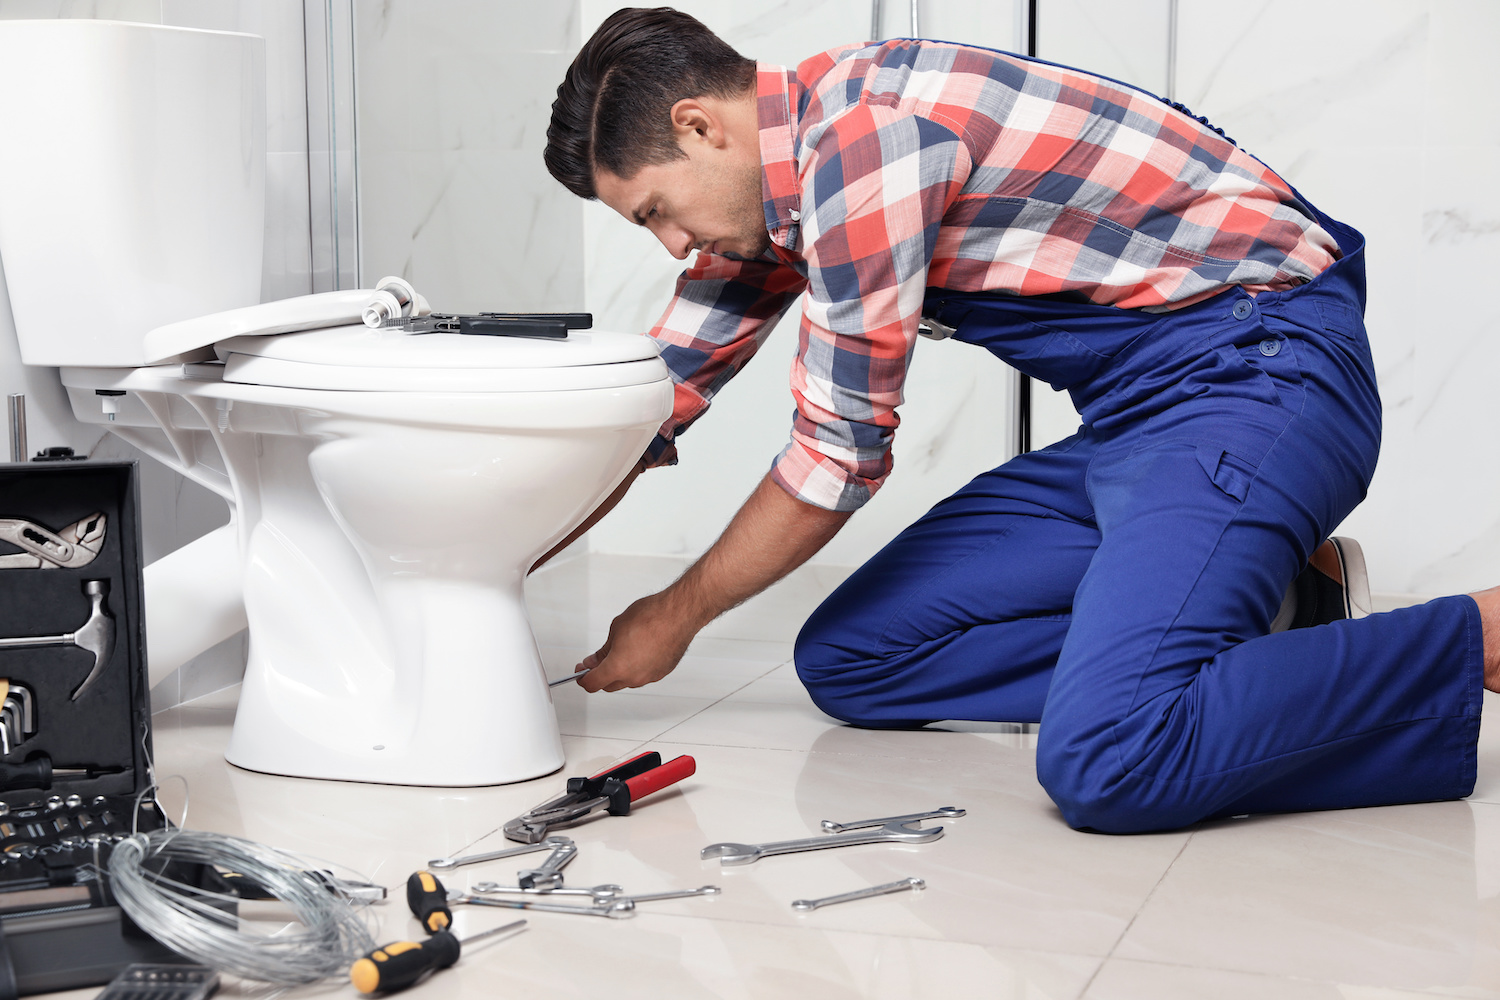 how to install a toilet turning off supply line